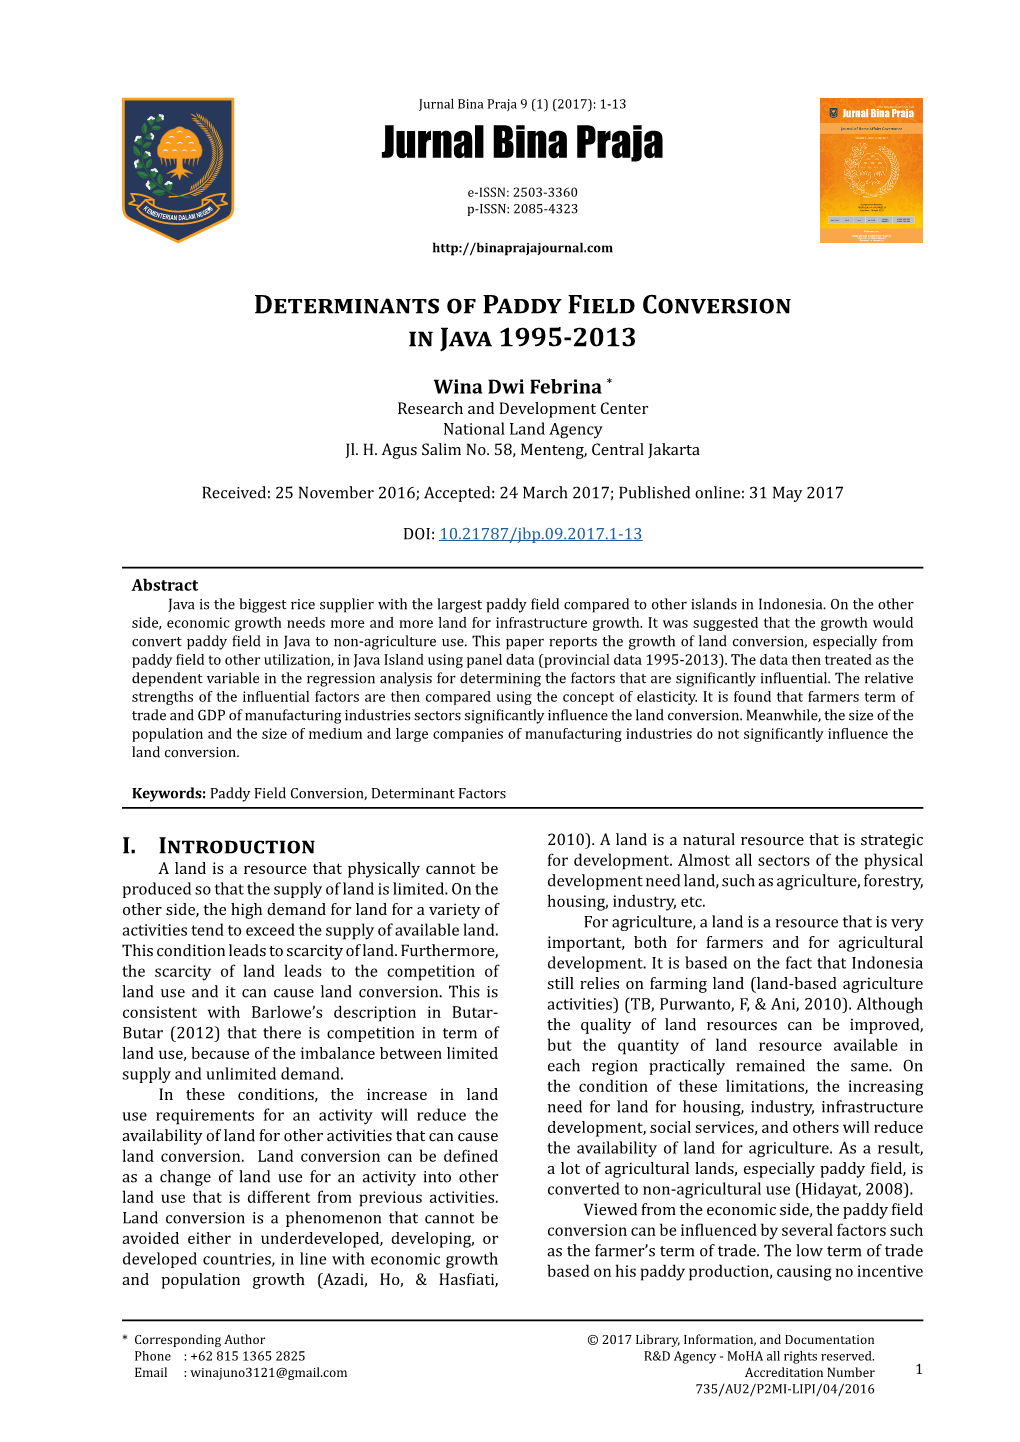 Determinants of Paddy Field Conversion in Java 1995-2013